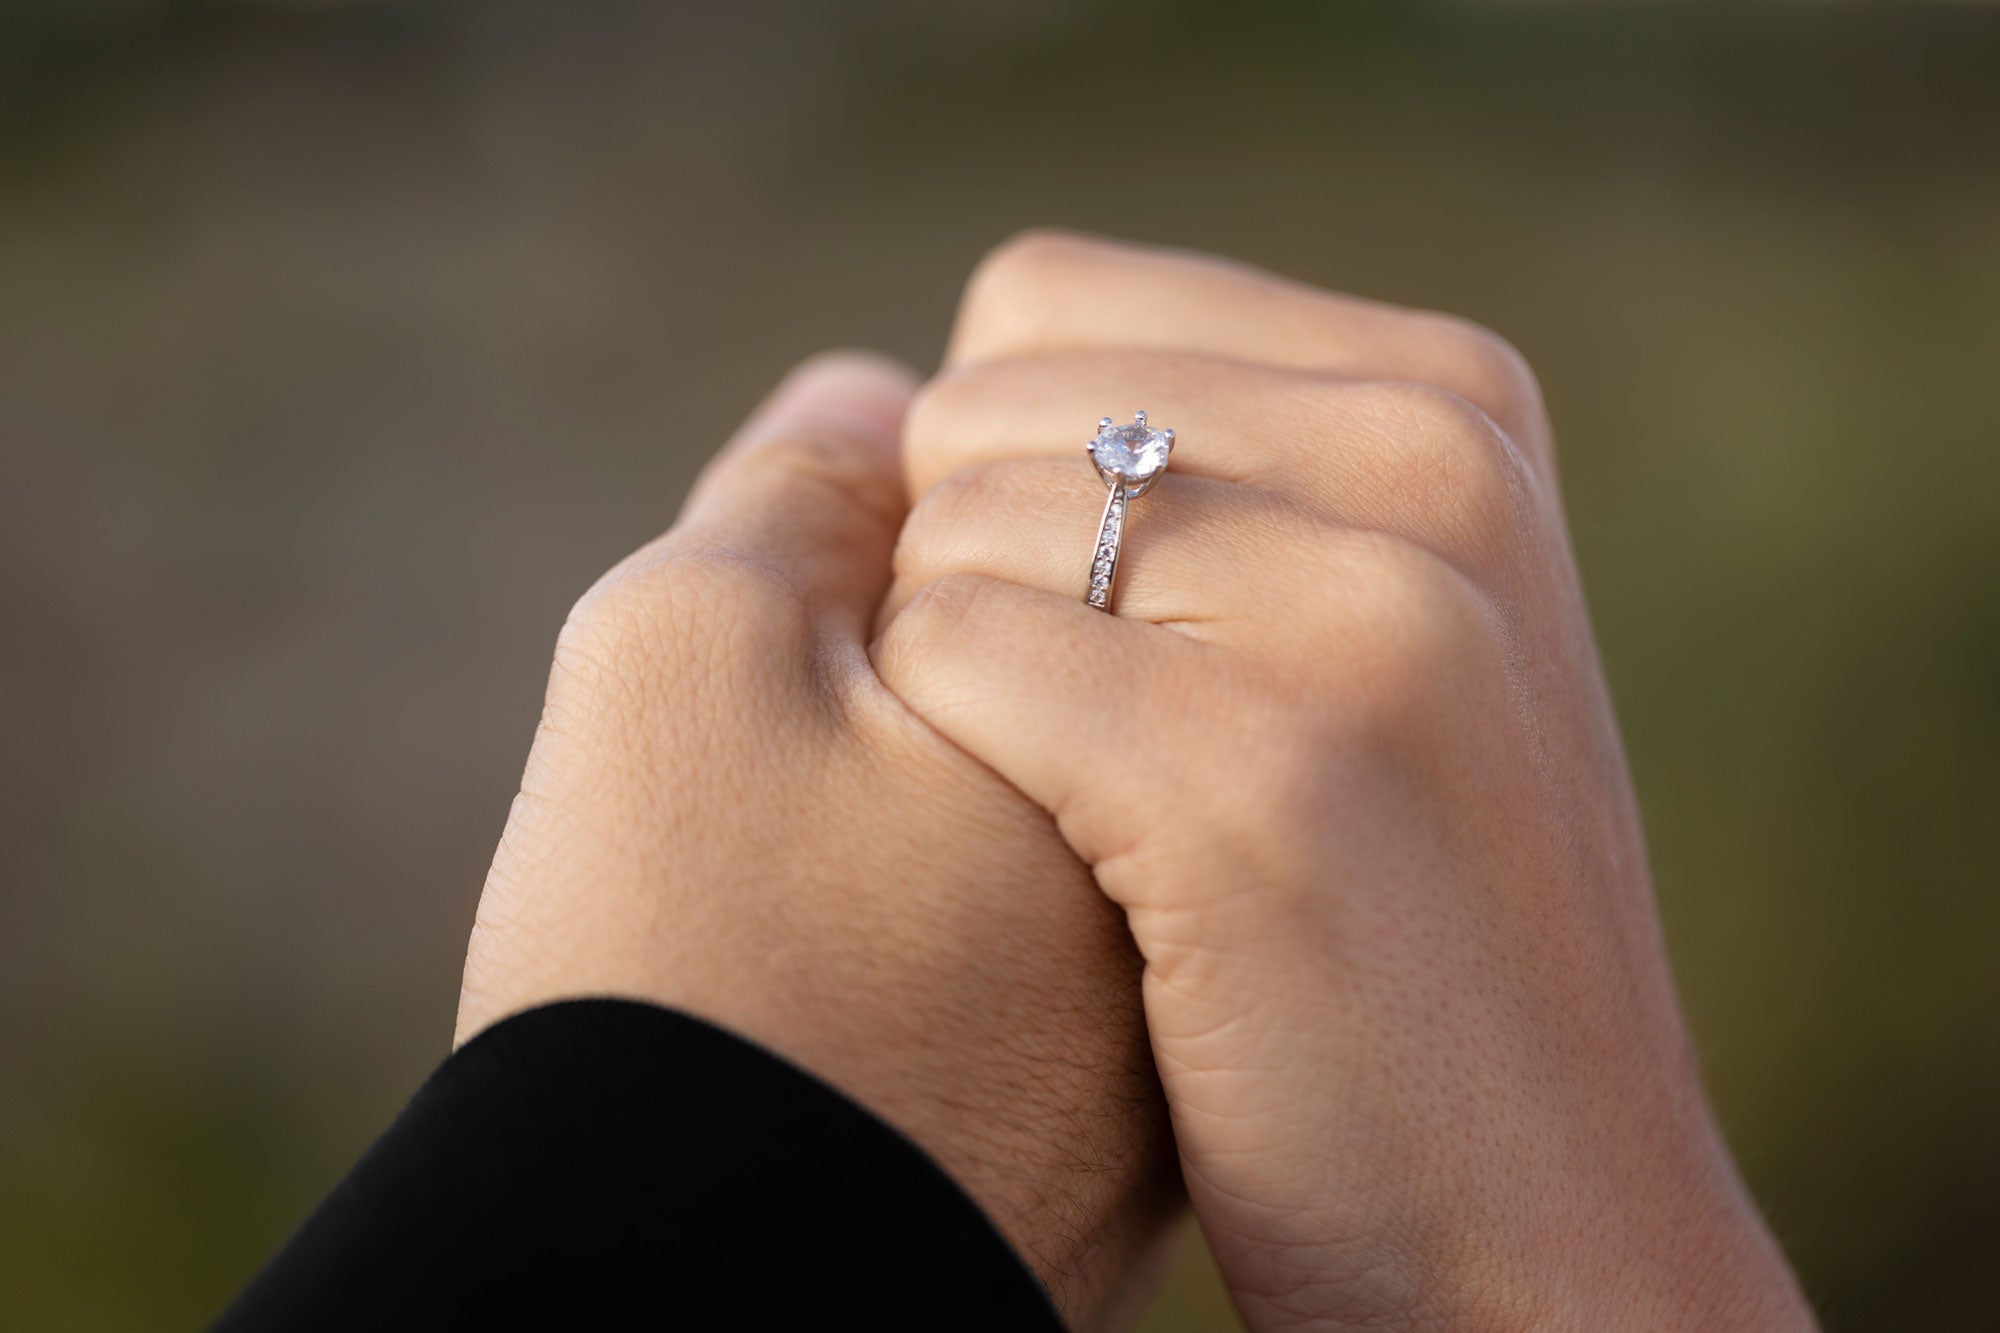 Selecting the Perfect Diamond for an Engagement Ring